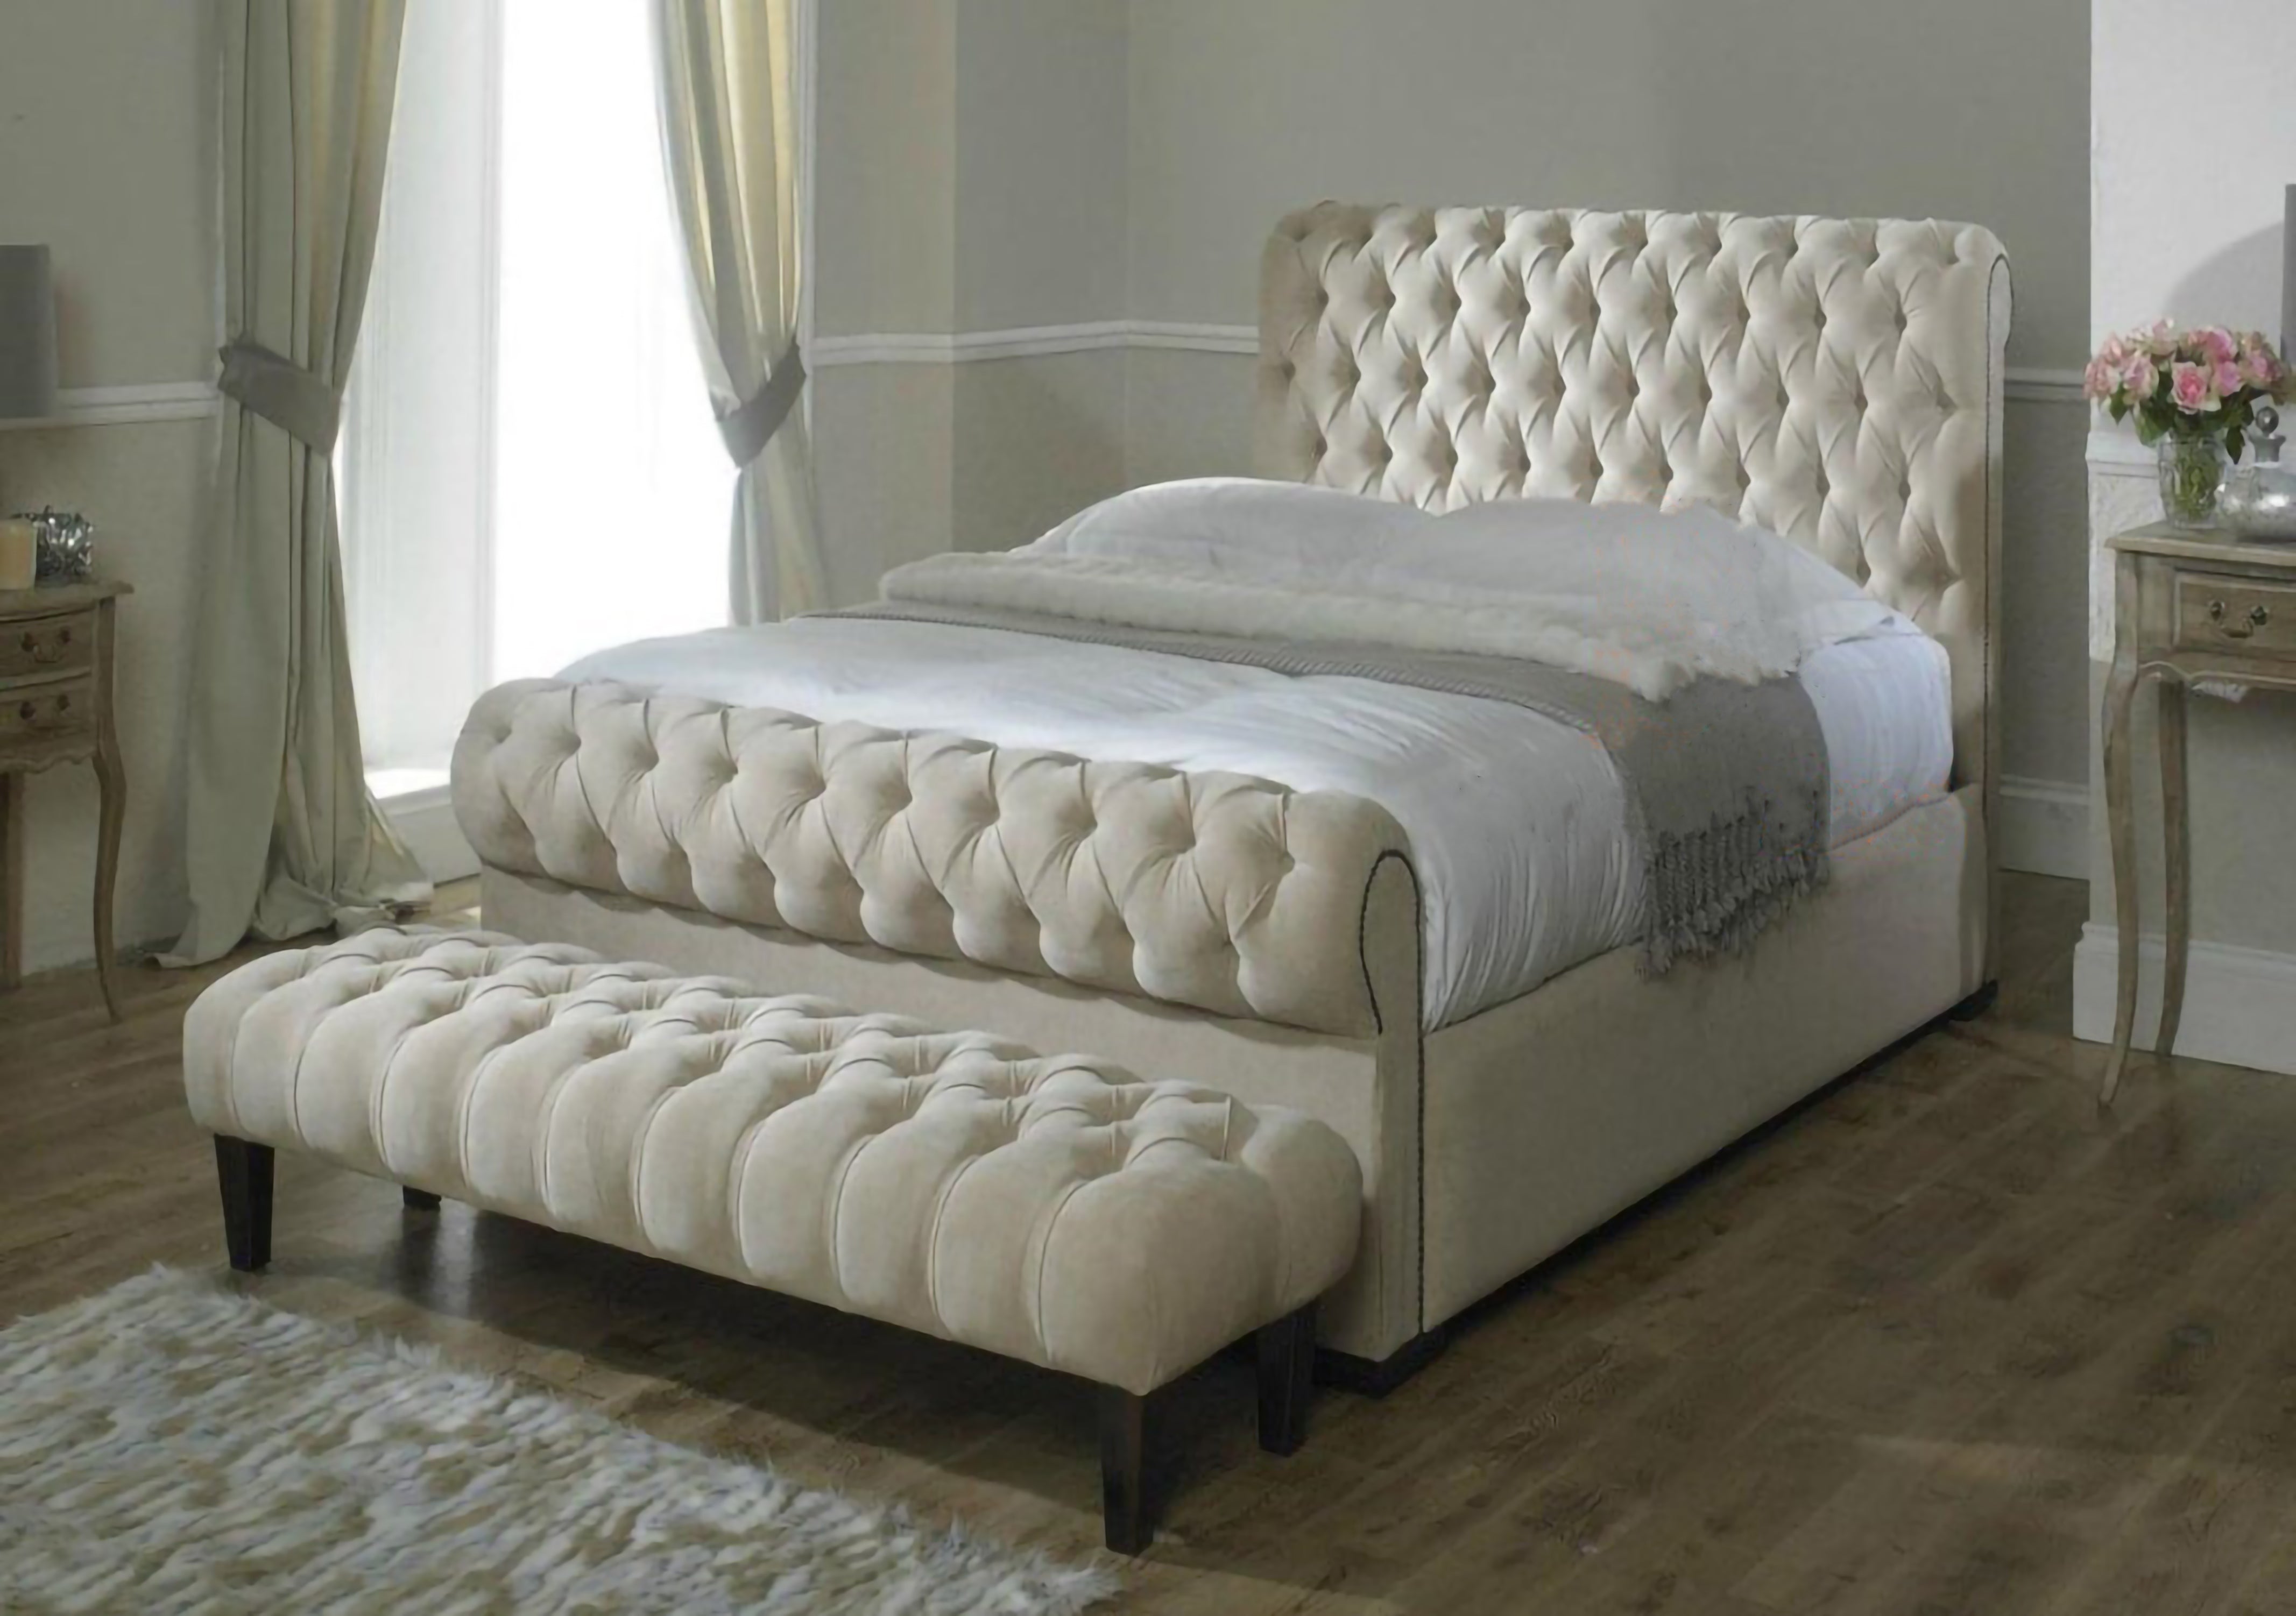 An image of Regency Sleigh Chesterfield Bed